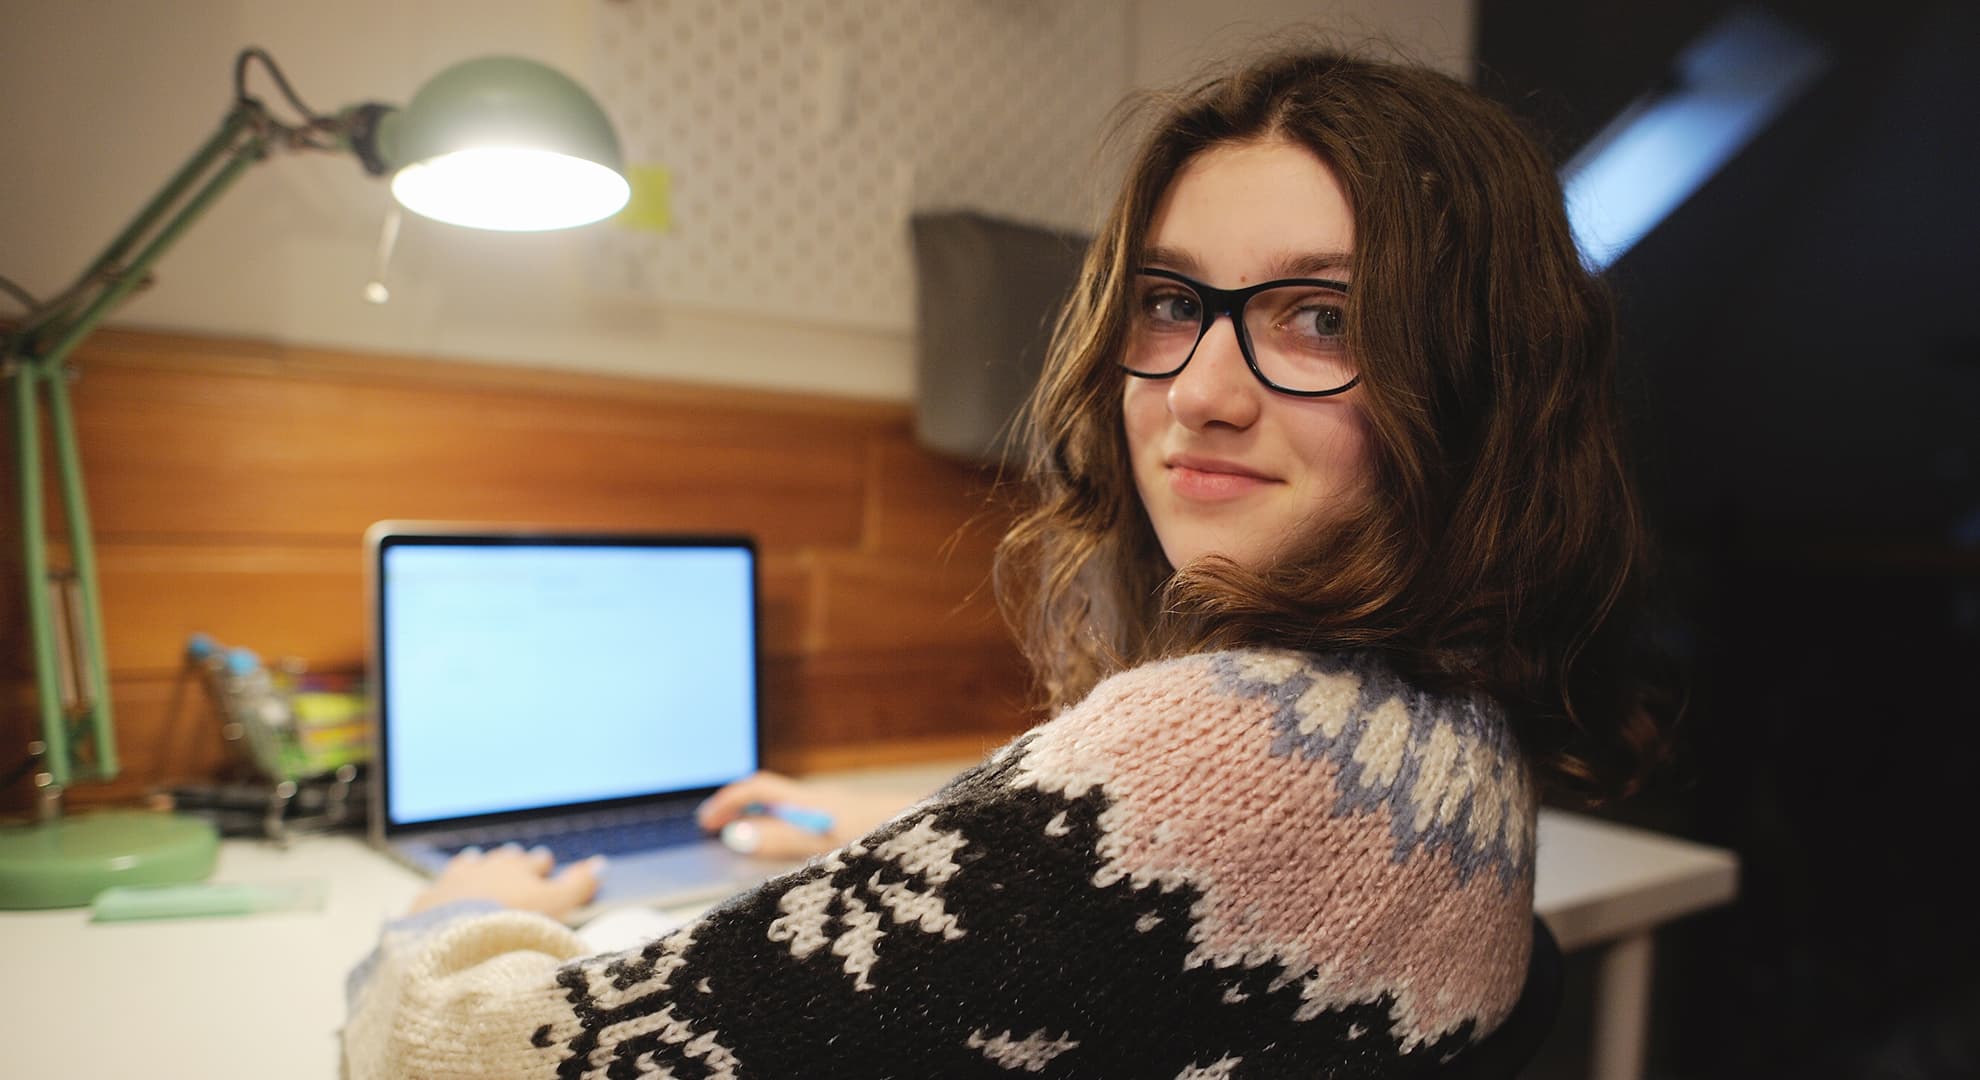 Young woman sitting at a desk with a computer